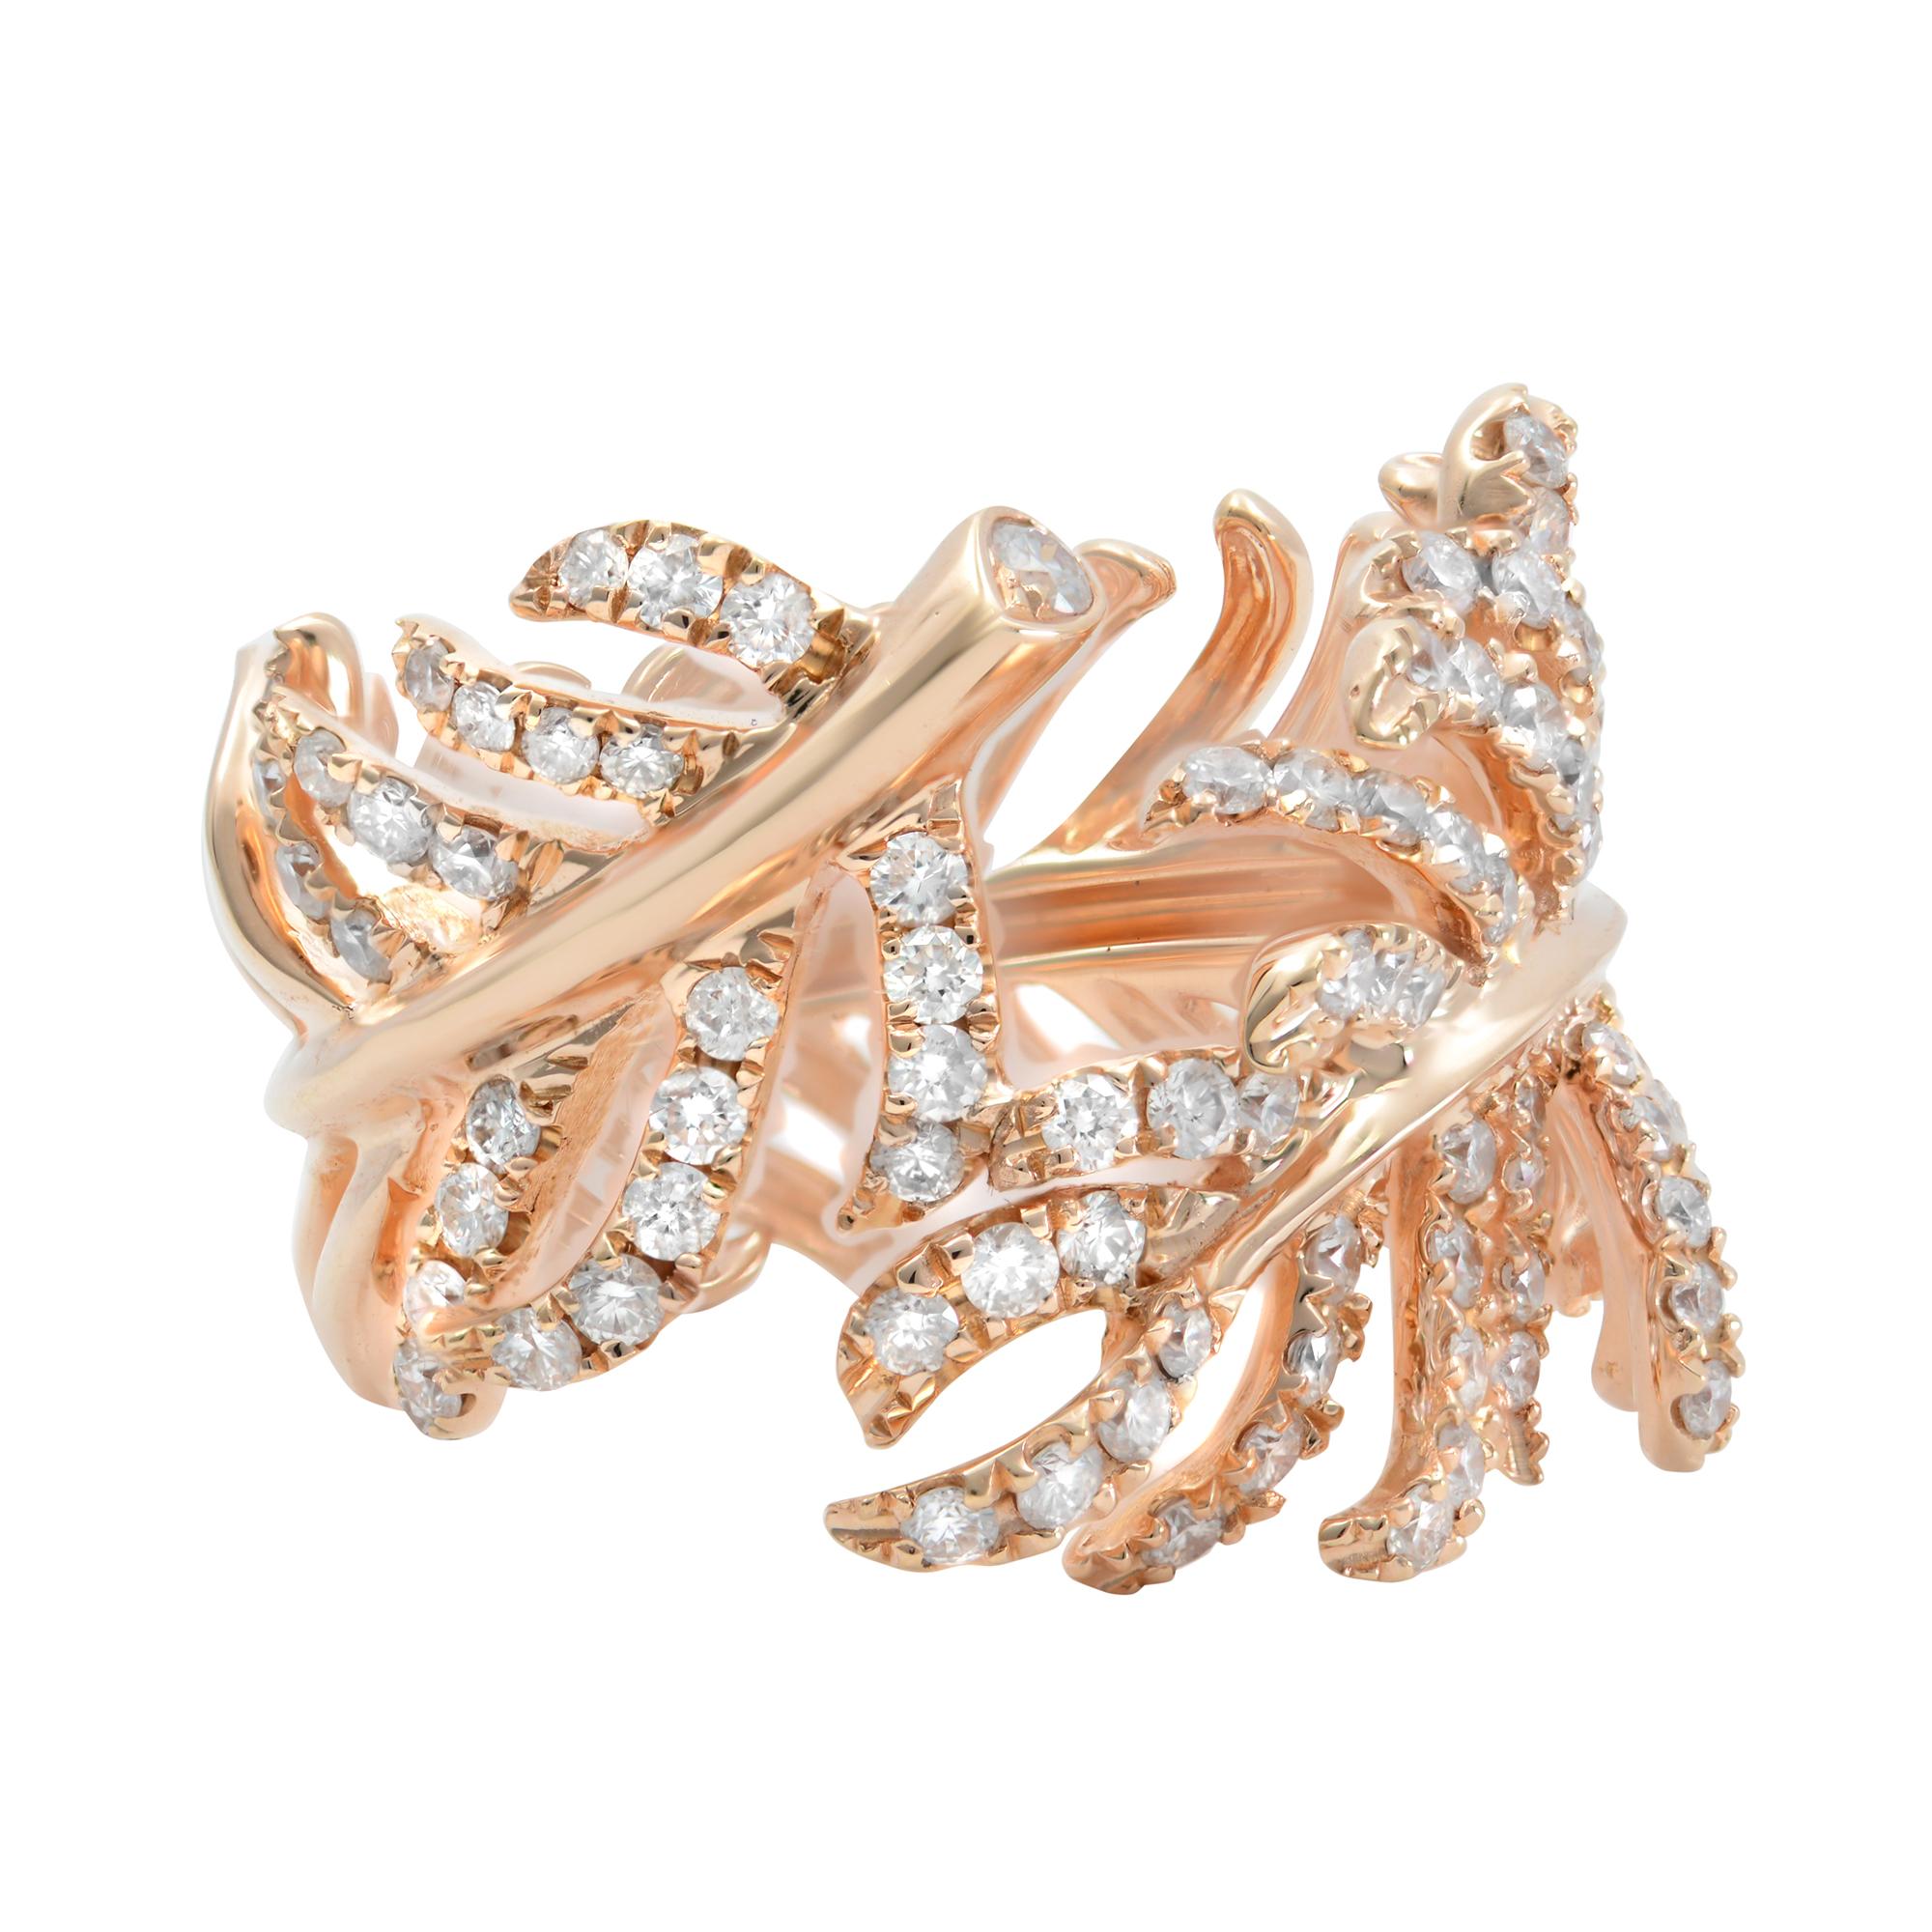 14k rose gold diamond feather cocktail ring. This heavenly feminine piece incorporates a detailed design and it is sure to make a statement. The ring is set with 1.24cttw. Diamond color G and VS-SI clarity. Ring size 6. Comes with a presentable gift